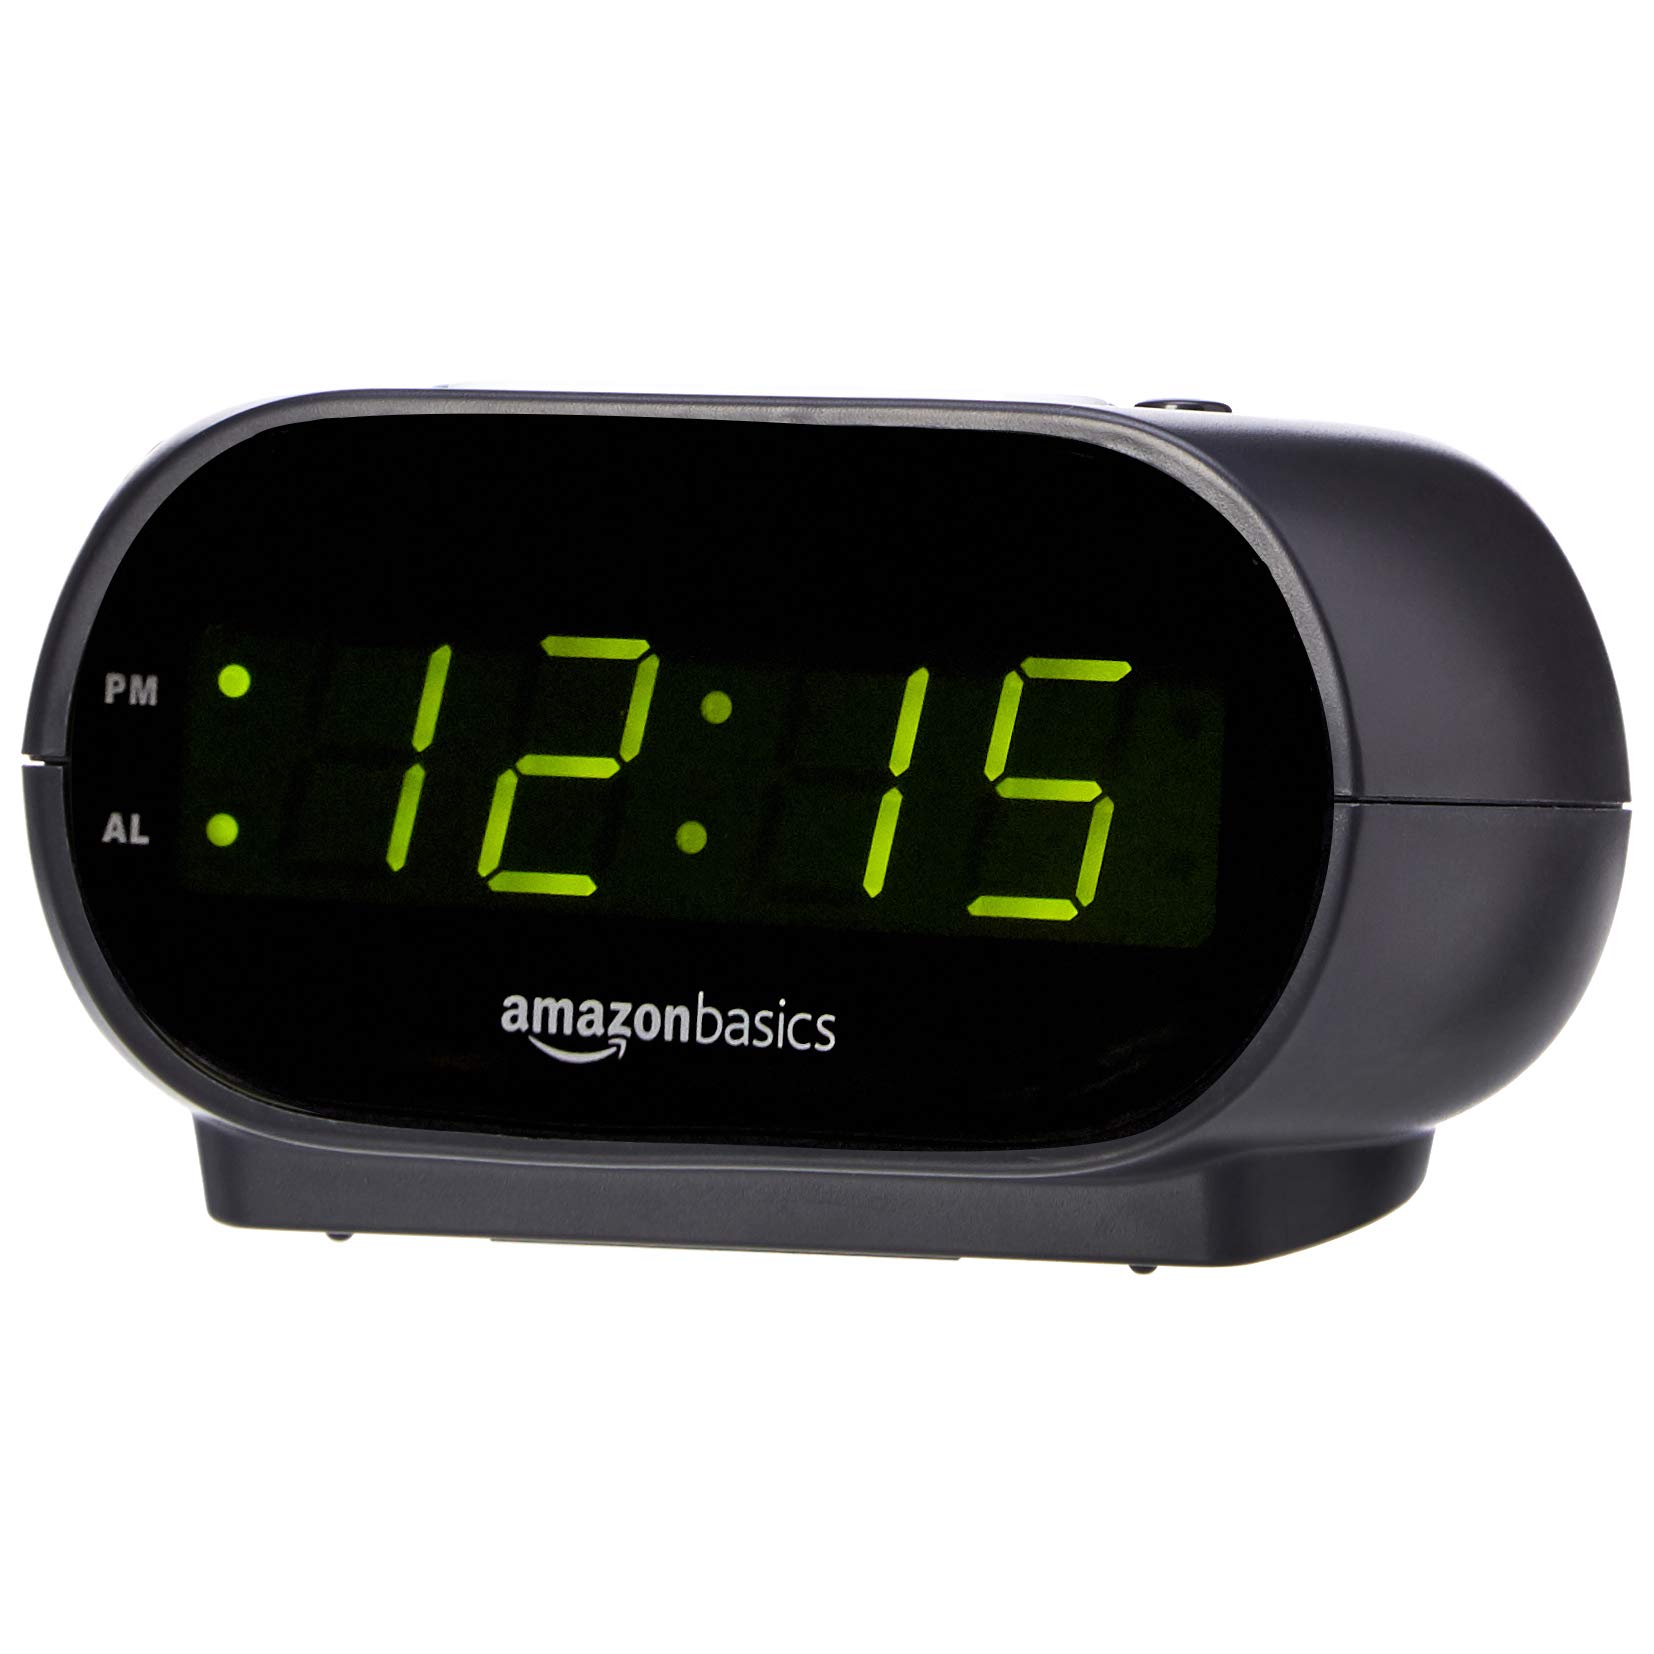 Book Cover Amazon Basics Small Digital Alarm Clock with LED Display, Nightlight and Battery Backup - 4.5 x 3.5 x 2.4 Inches